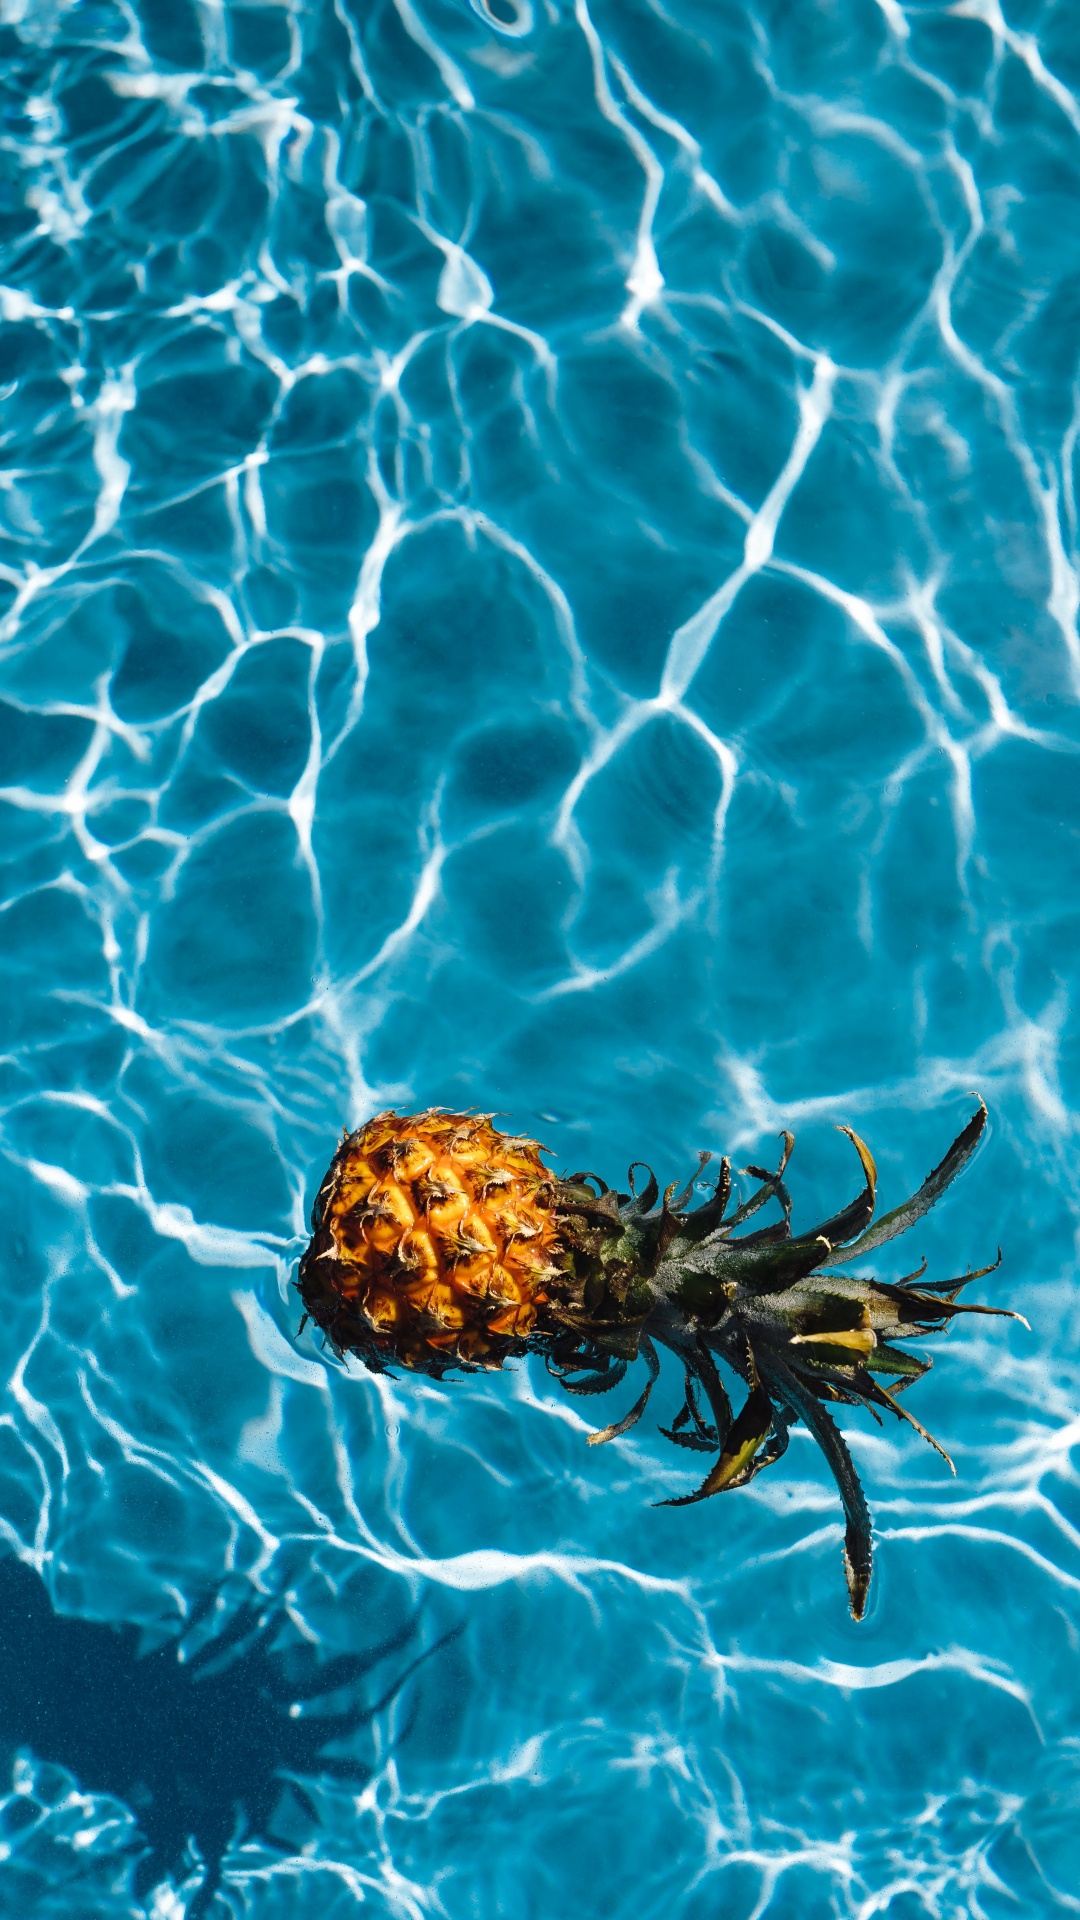 Brown and Green Pineapple Floating on Water. Wallpaper in 1080x1920 Resolution